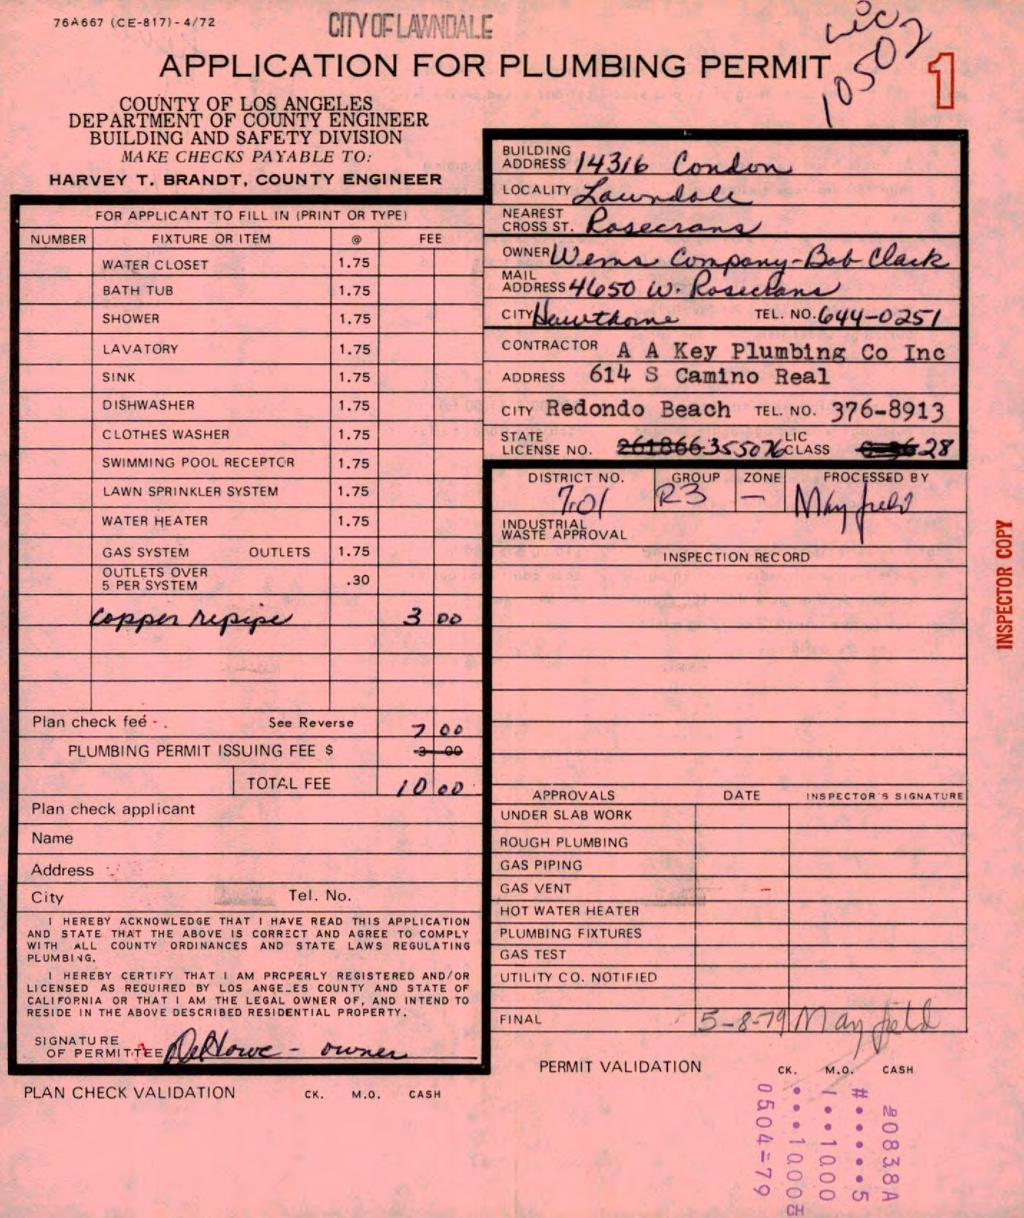 76A«fl7 <CE-B17)-4/72 crryon./^; APPLICATION FOR PLUMBING PERMIT COUNTY OF LOS ANGELES DEPARTMENT OF COUNTY ENGINEER BUILDING AND SAFETY DIVISION MAKE CHECKS PAYABLE TO: HARVEY T. BRANDT.